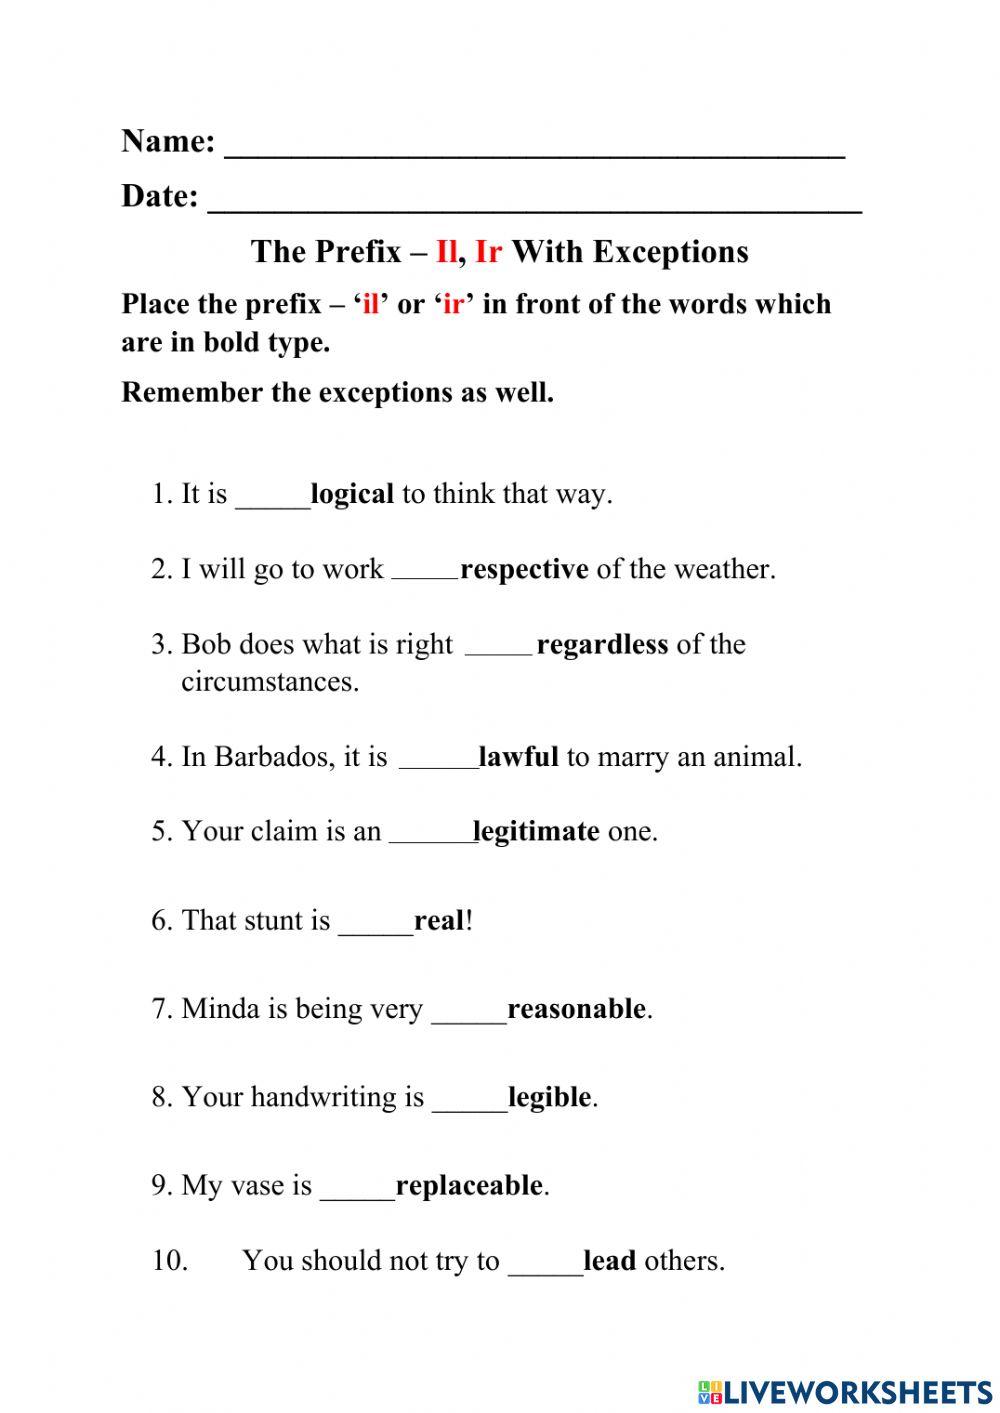 Prefixes - 'il,' 'ir' and 'un' With Exceptions